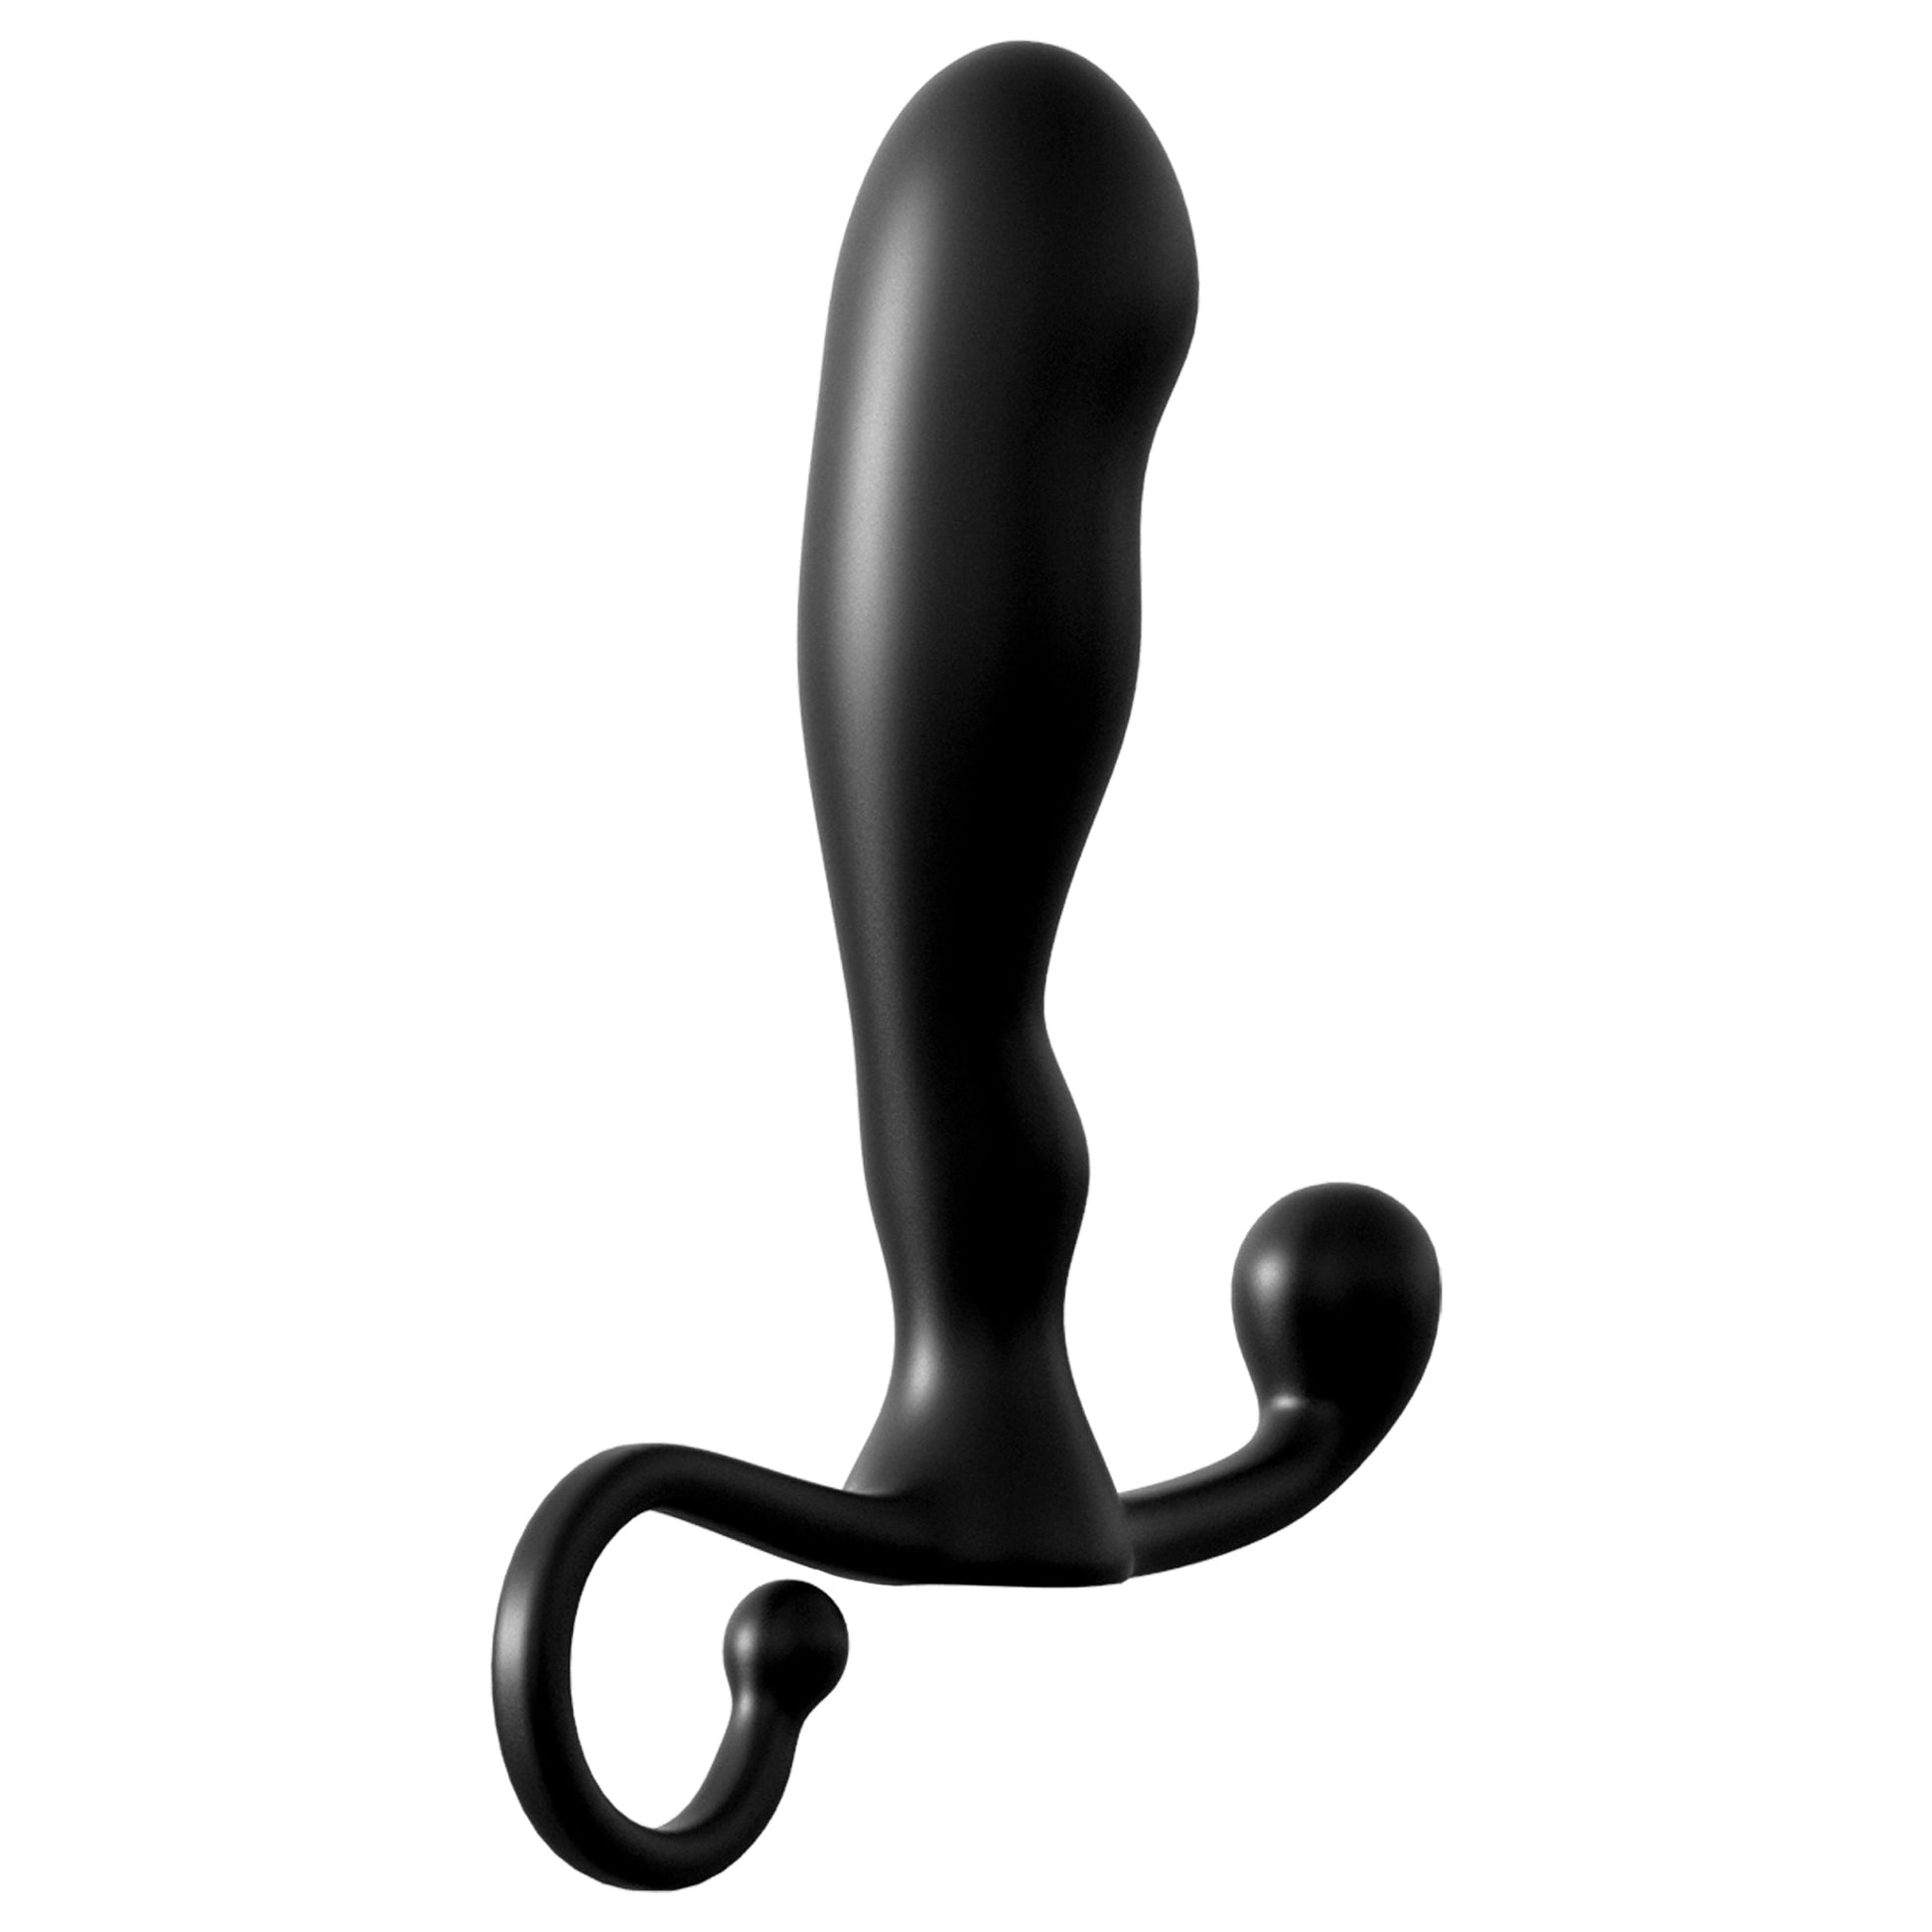 Anal Fantasy Collection Classix Prostate Stimulator - Black - Thorn & Feather Sex Toy Canada